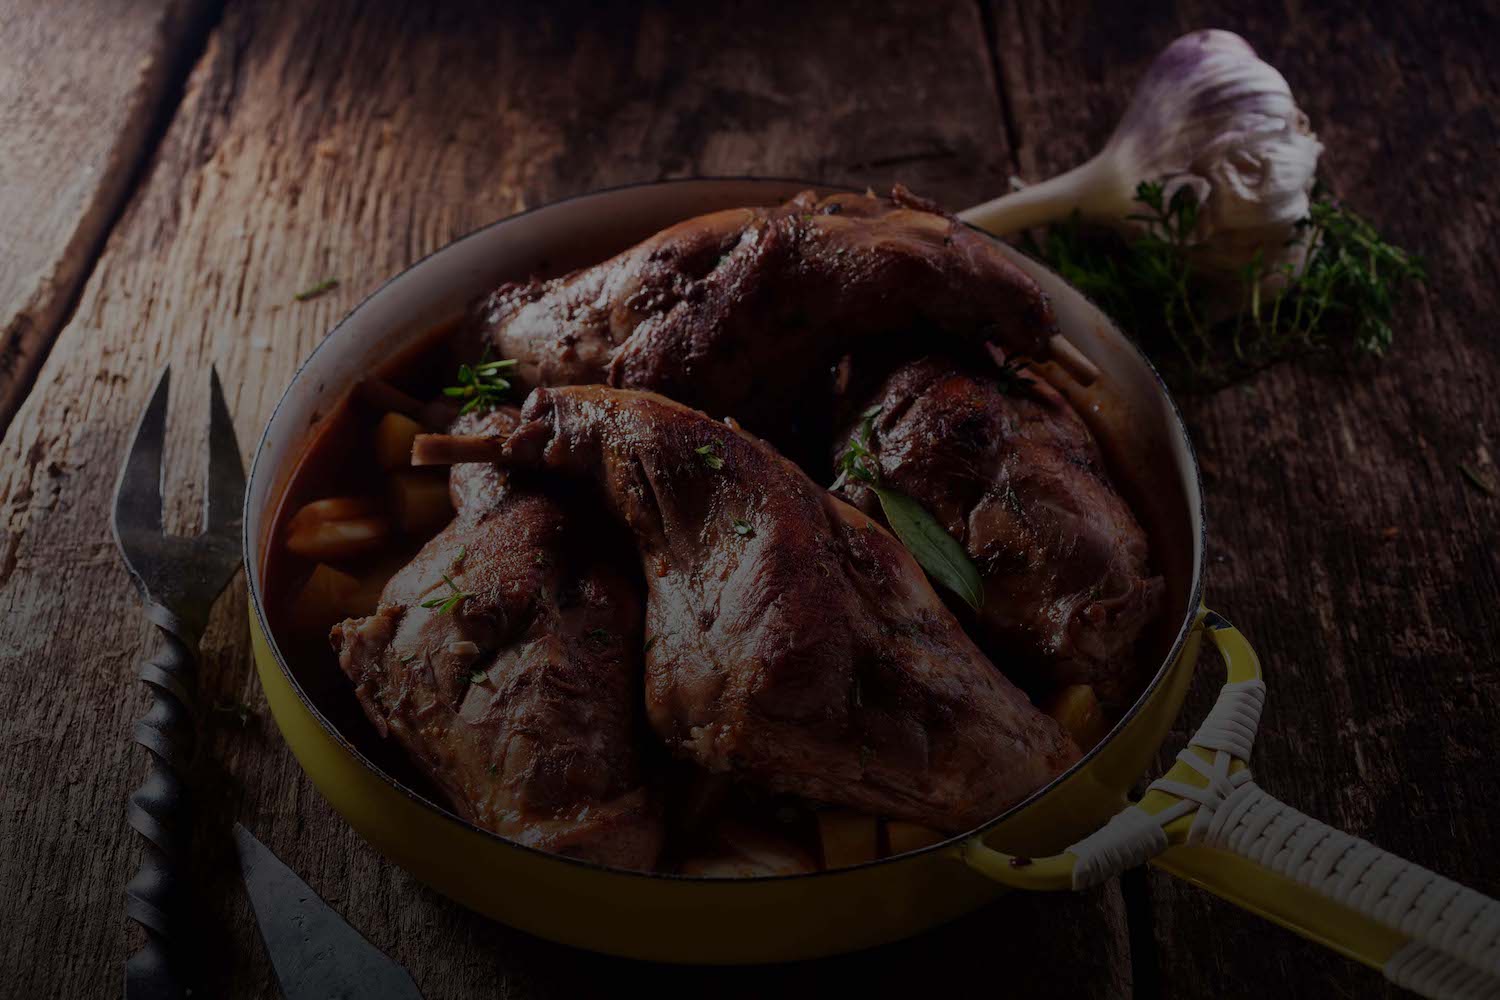 A rustic dish features roasted meat seasoned with herbs, served in a yellow-handled pan on a wooden surface. A garlic bulb and sprigs of fresh thyme lie beside the pan, while cutlery with saw-like edges is positioned on the left. The lighting is dim and moody.